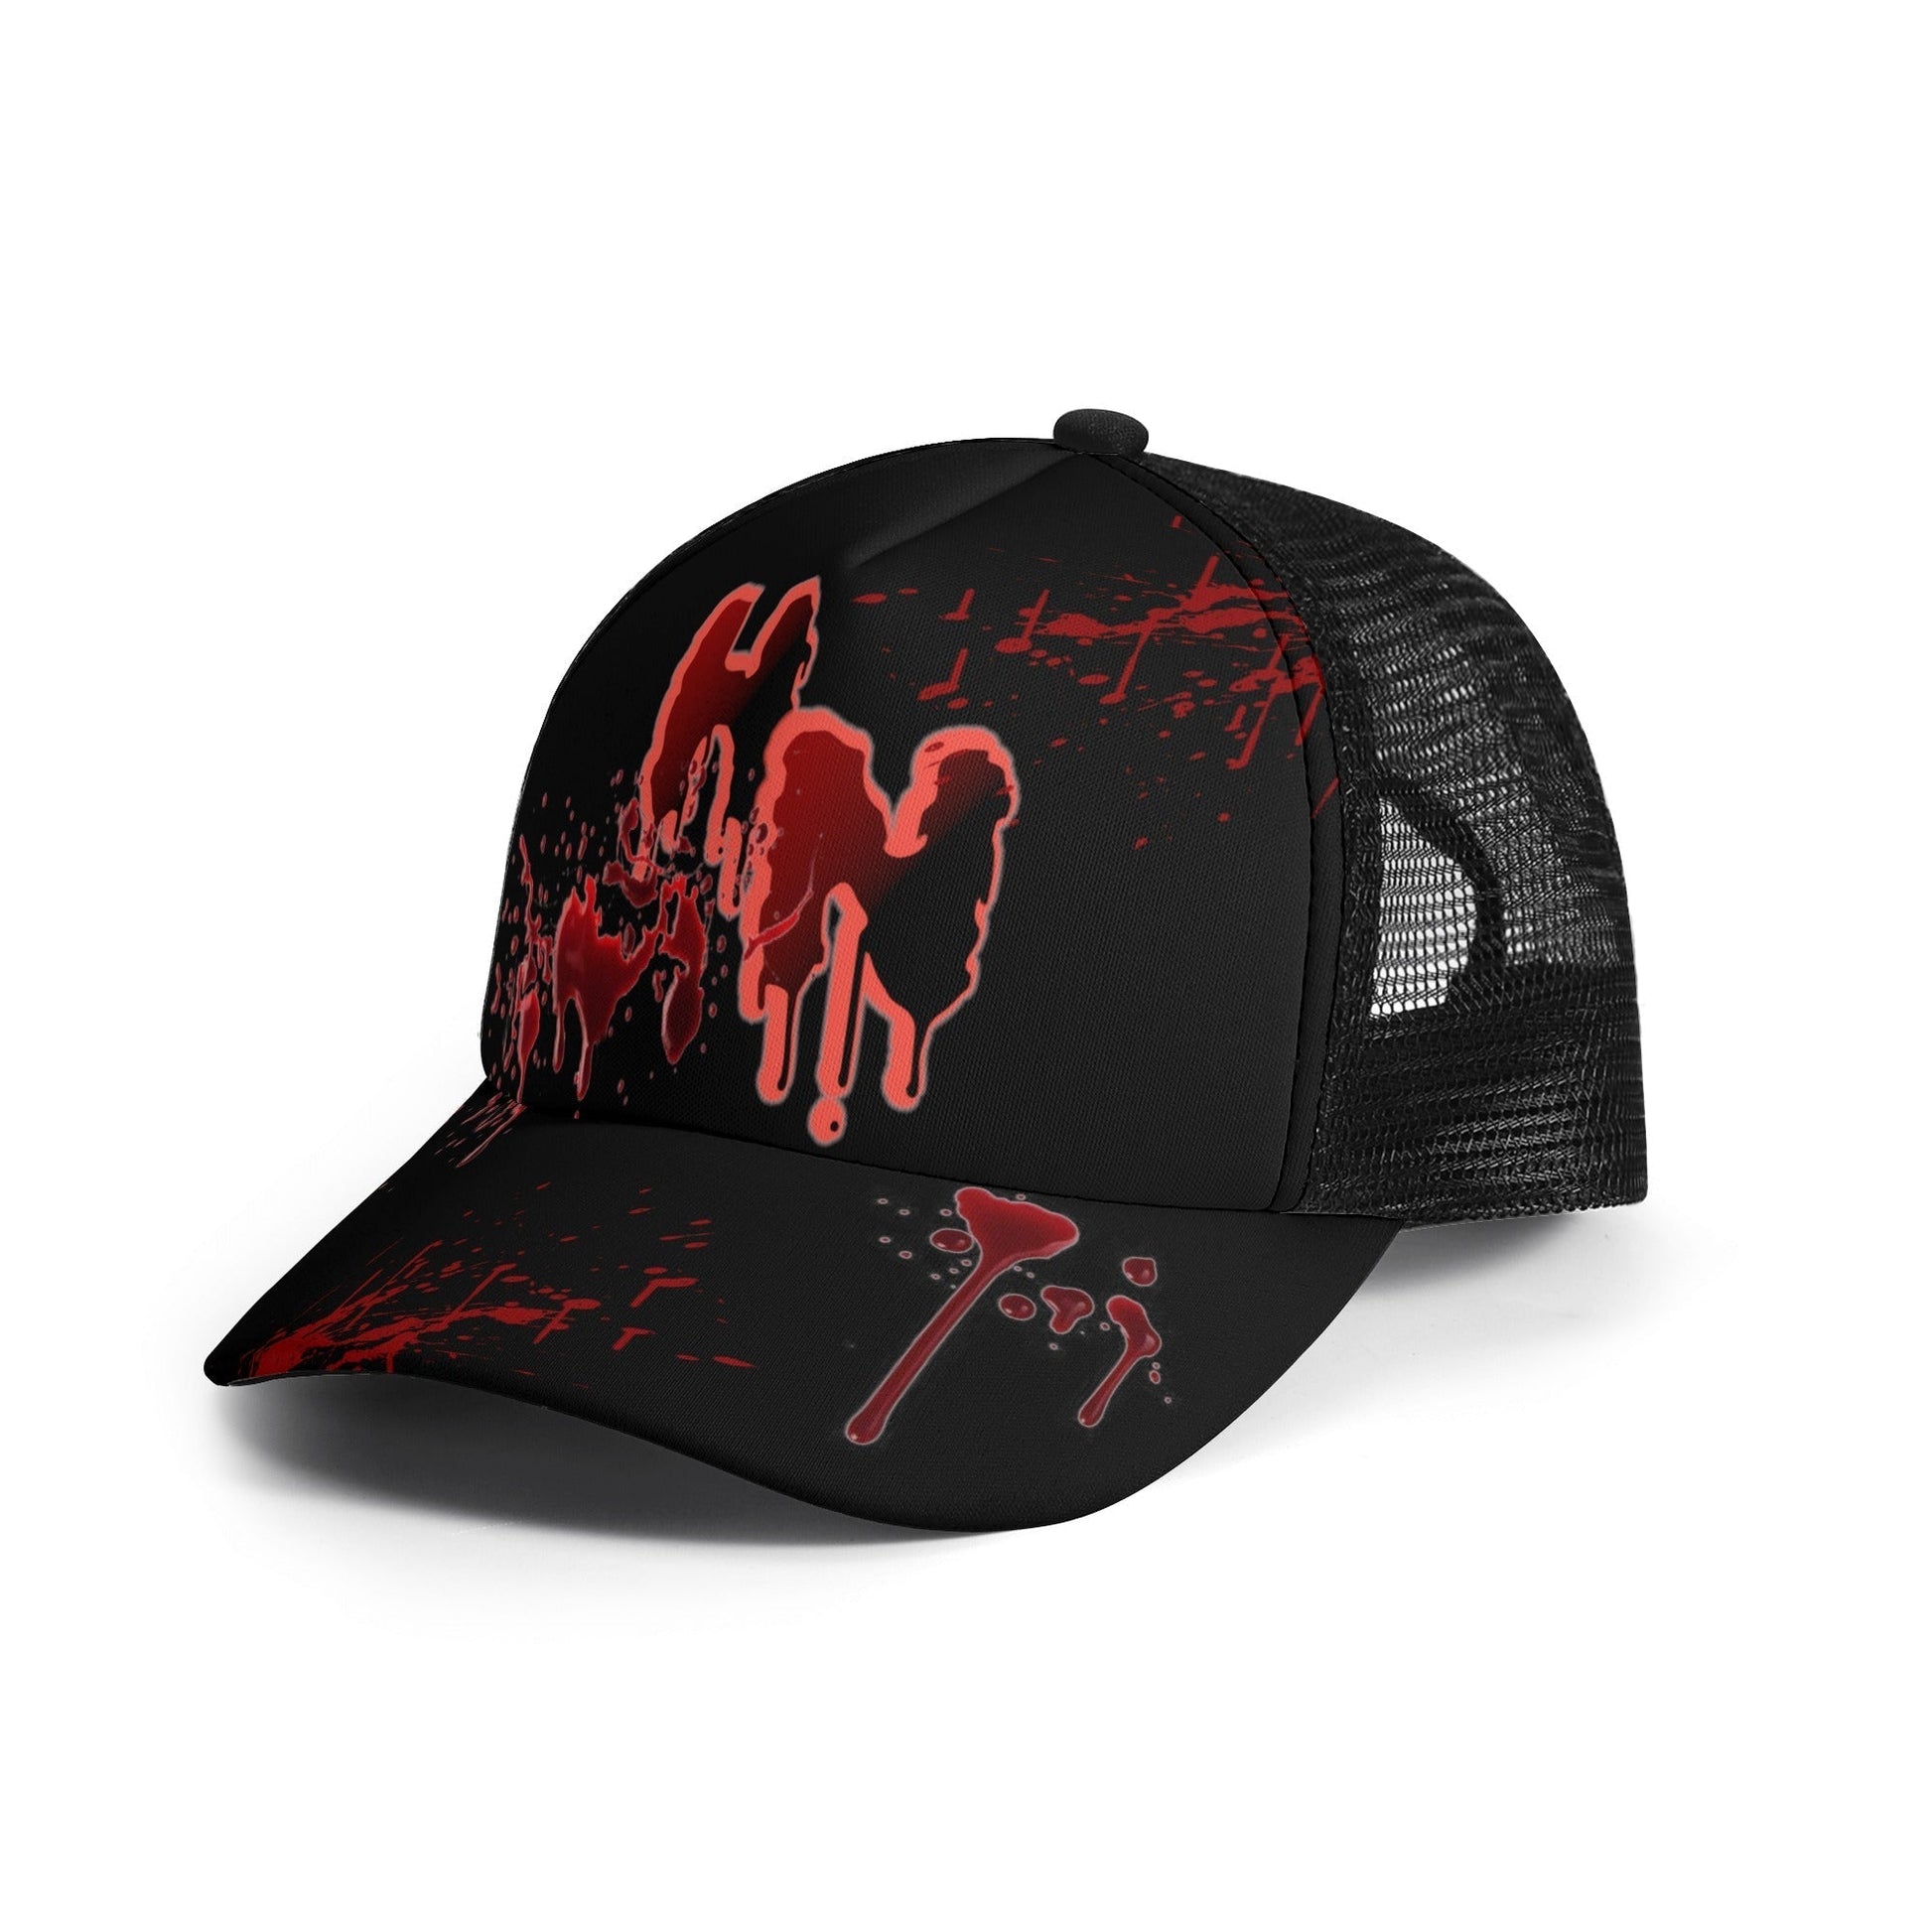 Stand out  with the  My Bloody Nuggieween Kids Mesh Baseball Caps  available at Hey Nugget. Grab yours today!